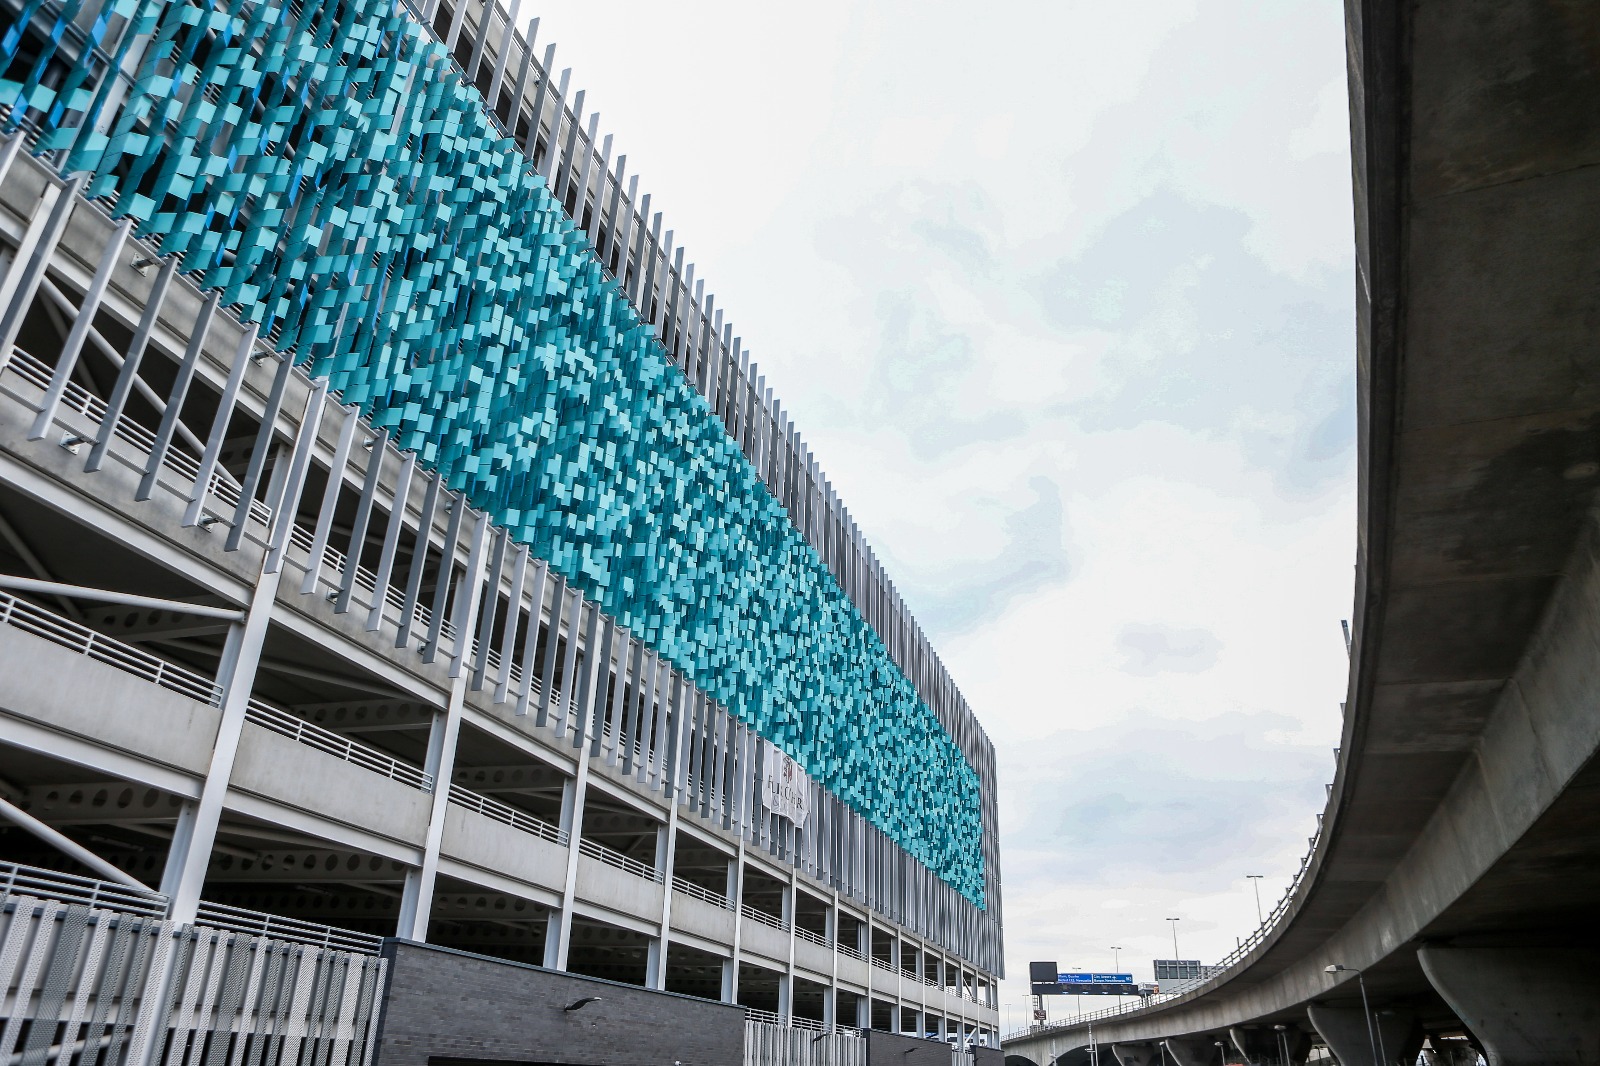 Belfast Harbour Opens New Multi-Storey Car Park in the Heart of City Quays Development